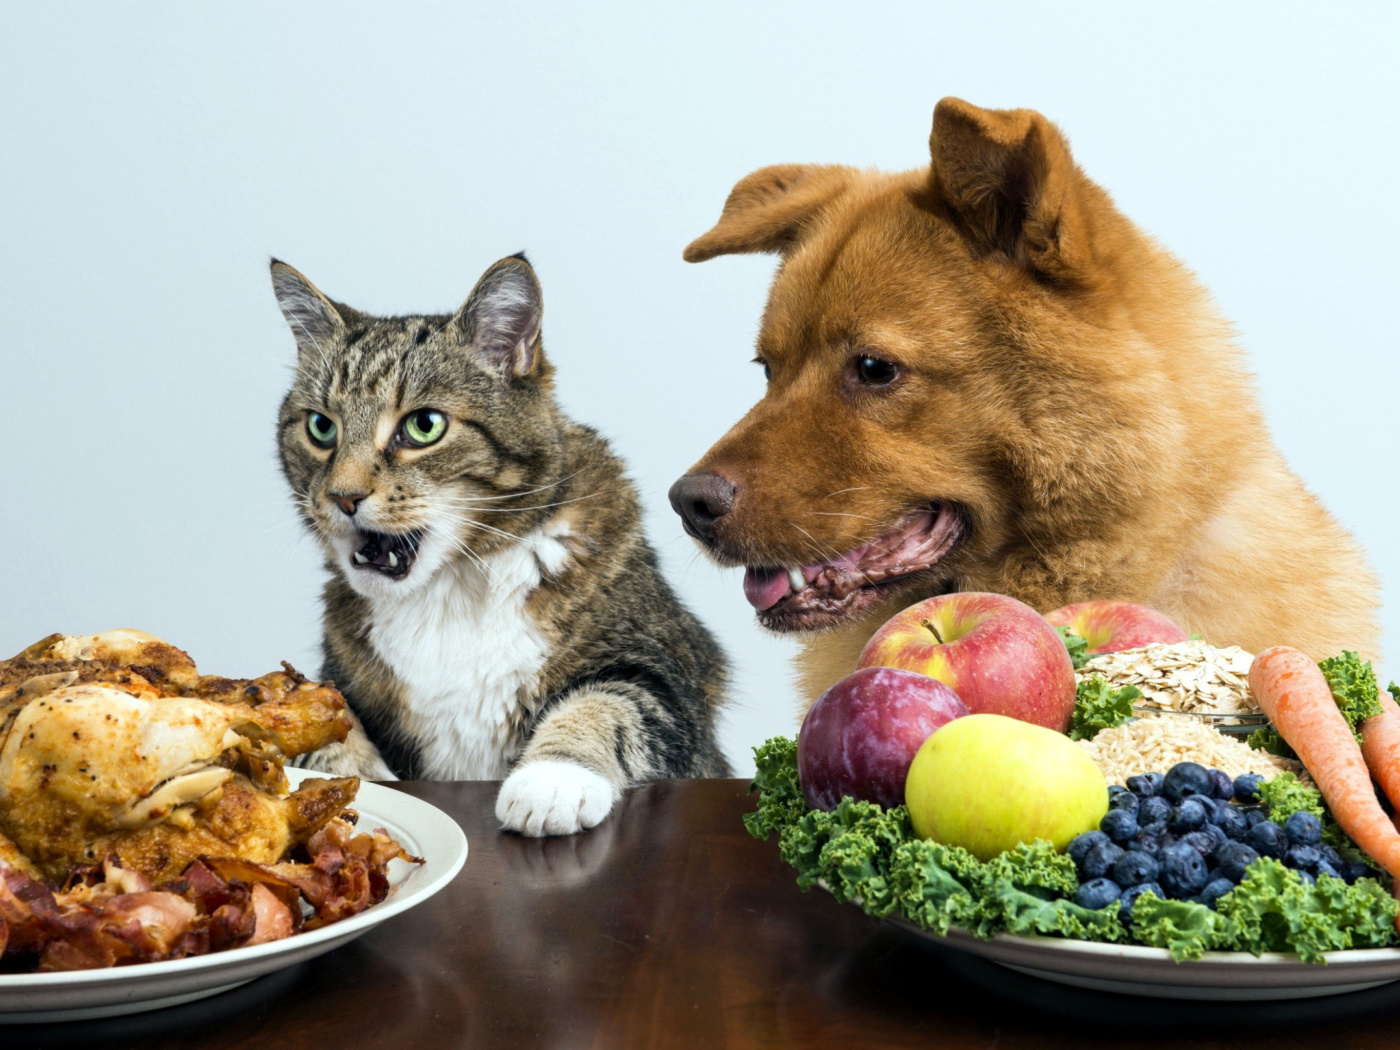 Dog and Cat Dinner wallpaper 1400x1050